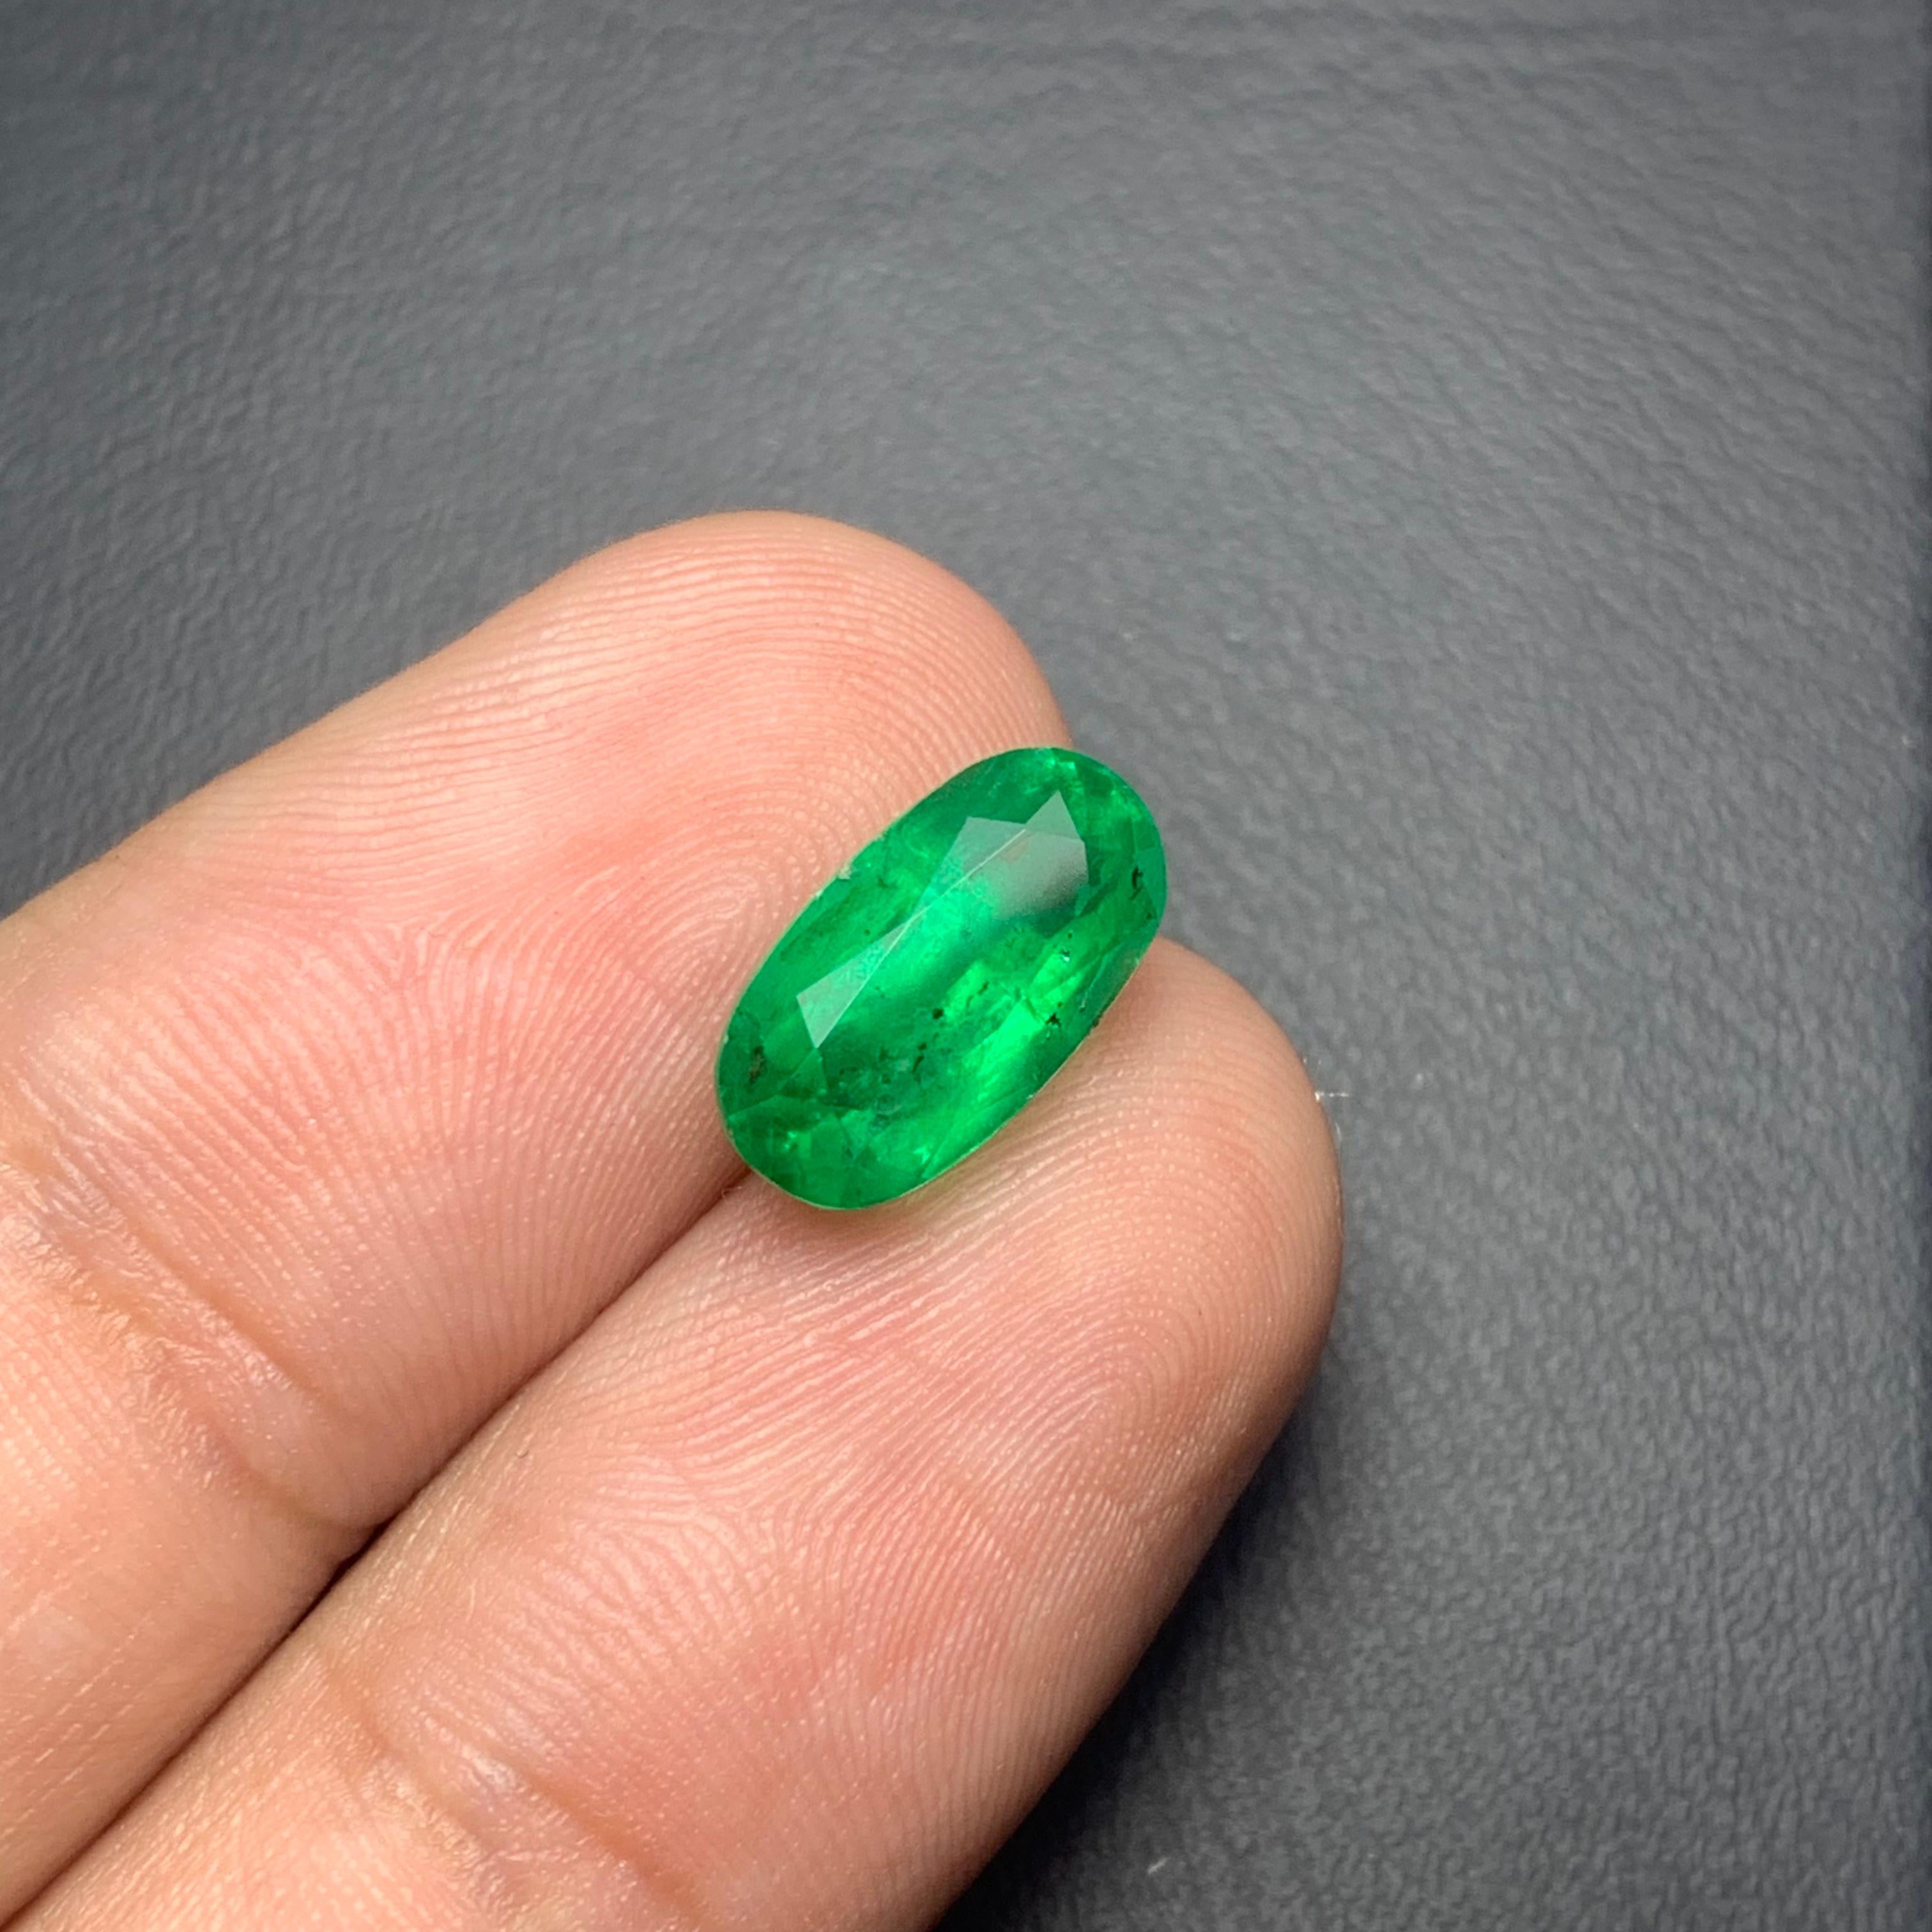 Gorgeous Natural Vivid Green Emerald Oval Shape from Pakistan Mine 3.10 Carat 3